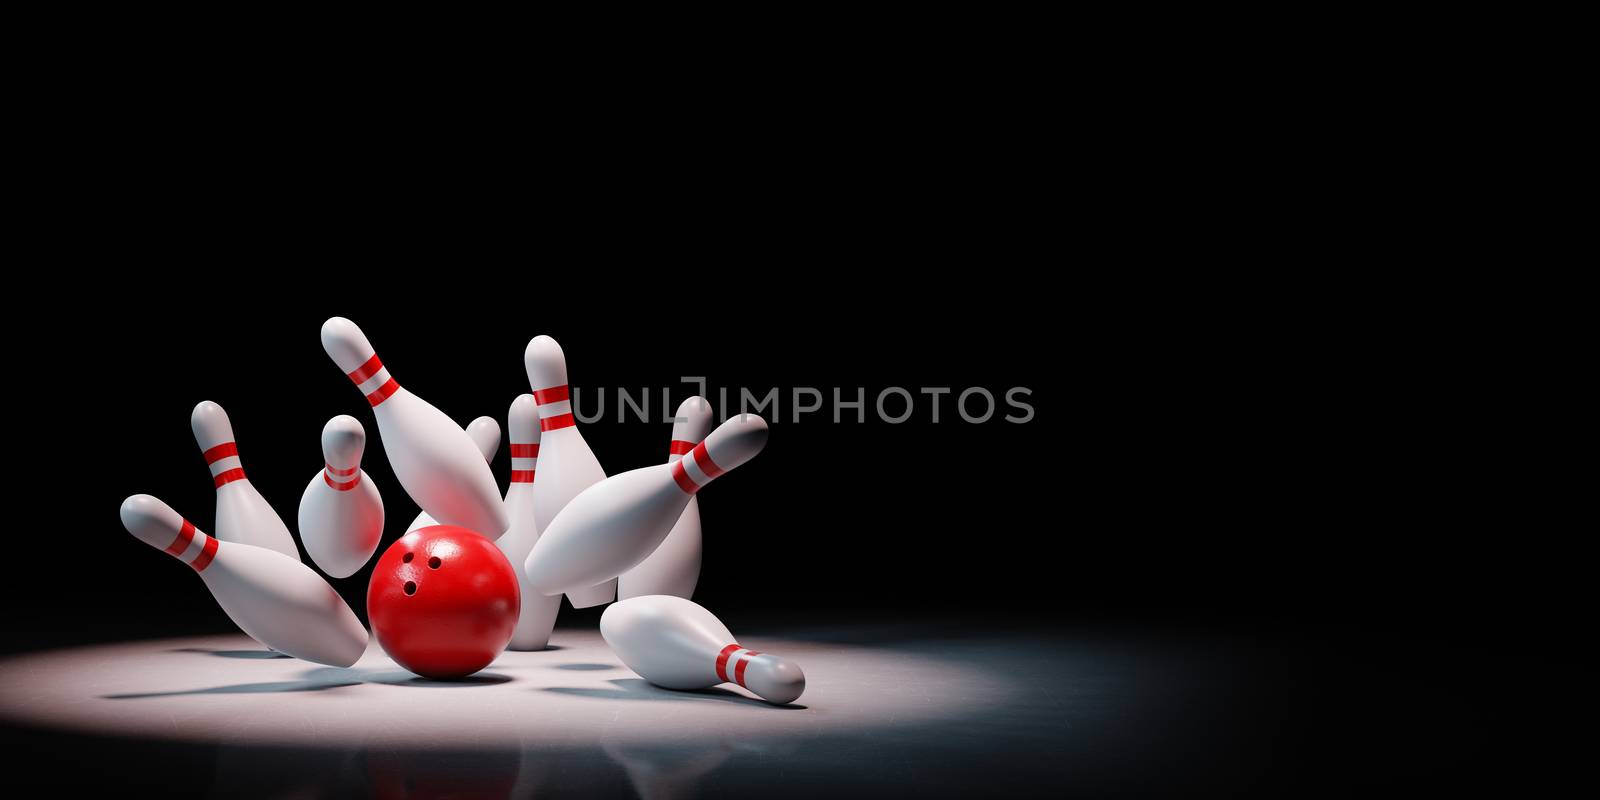 Strike of Red and White Bowling Skittles with Red Ball Spotlighted on Black Background with Copy Space 3D Illustration